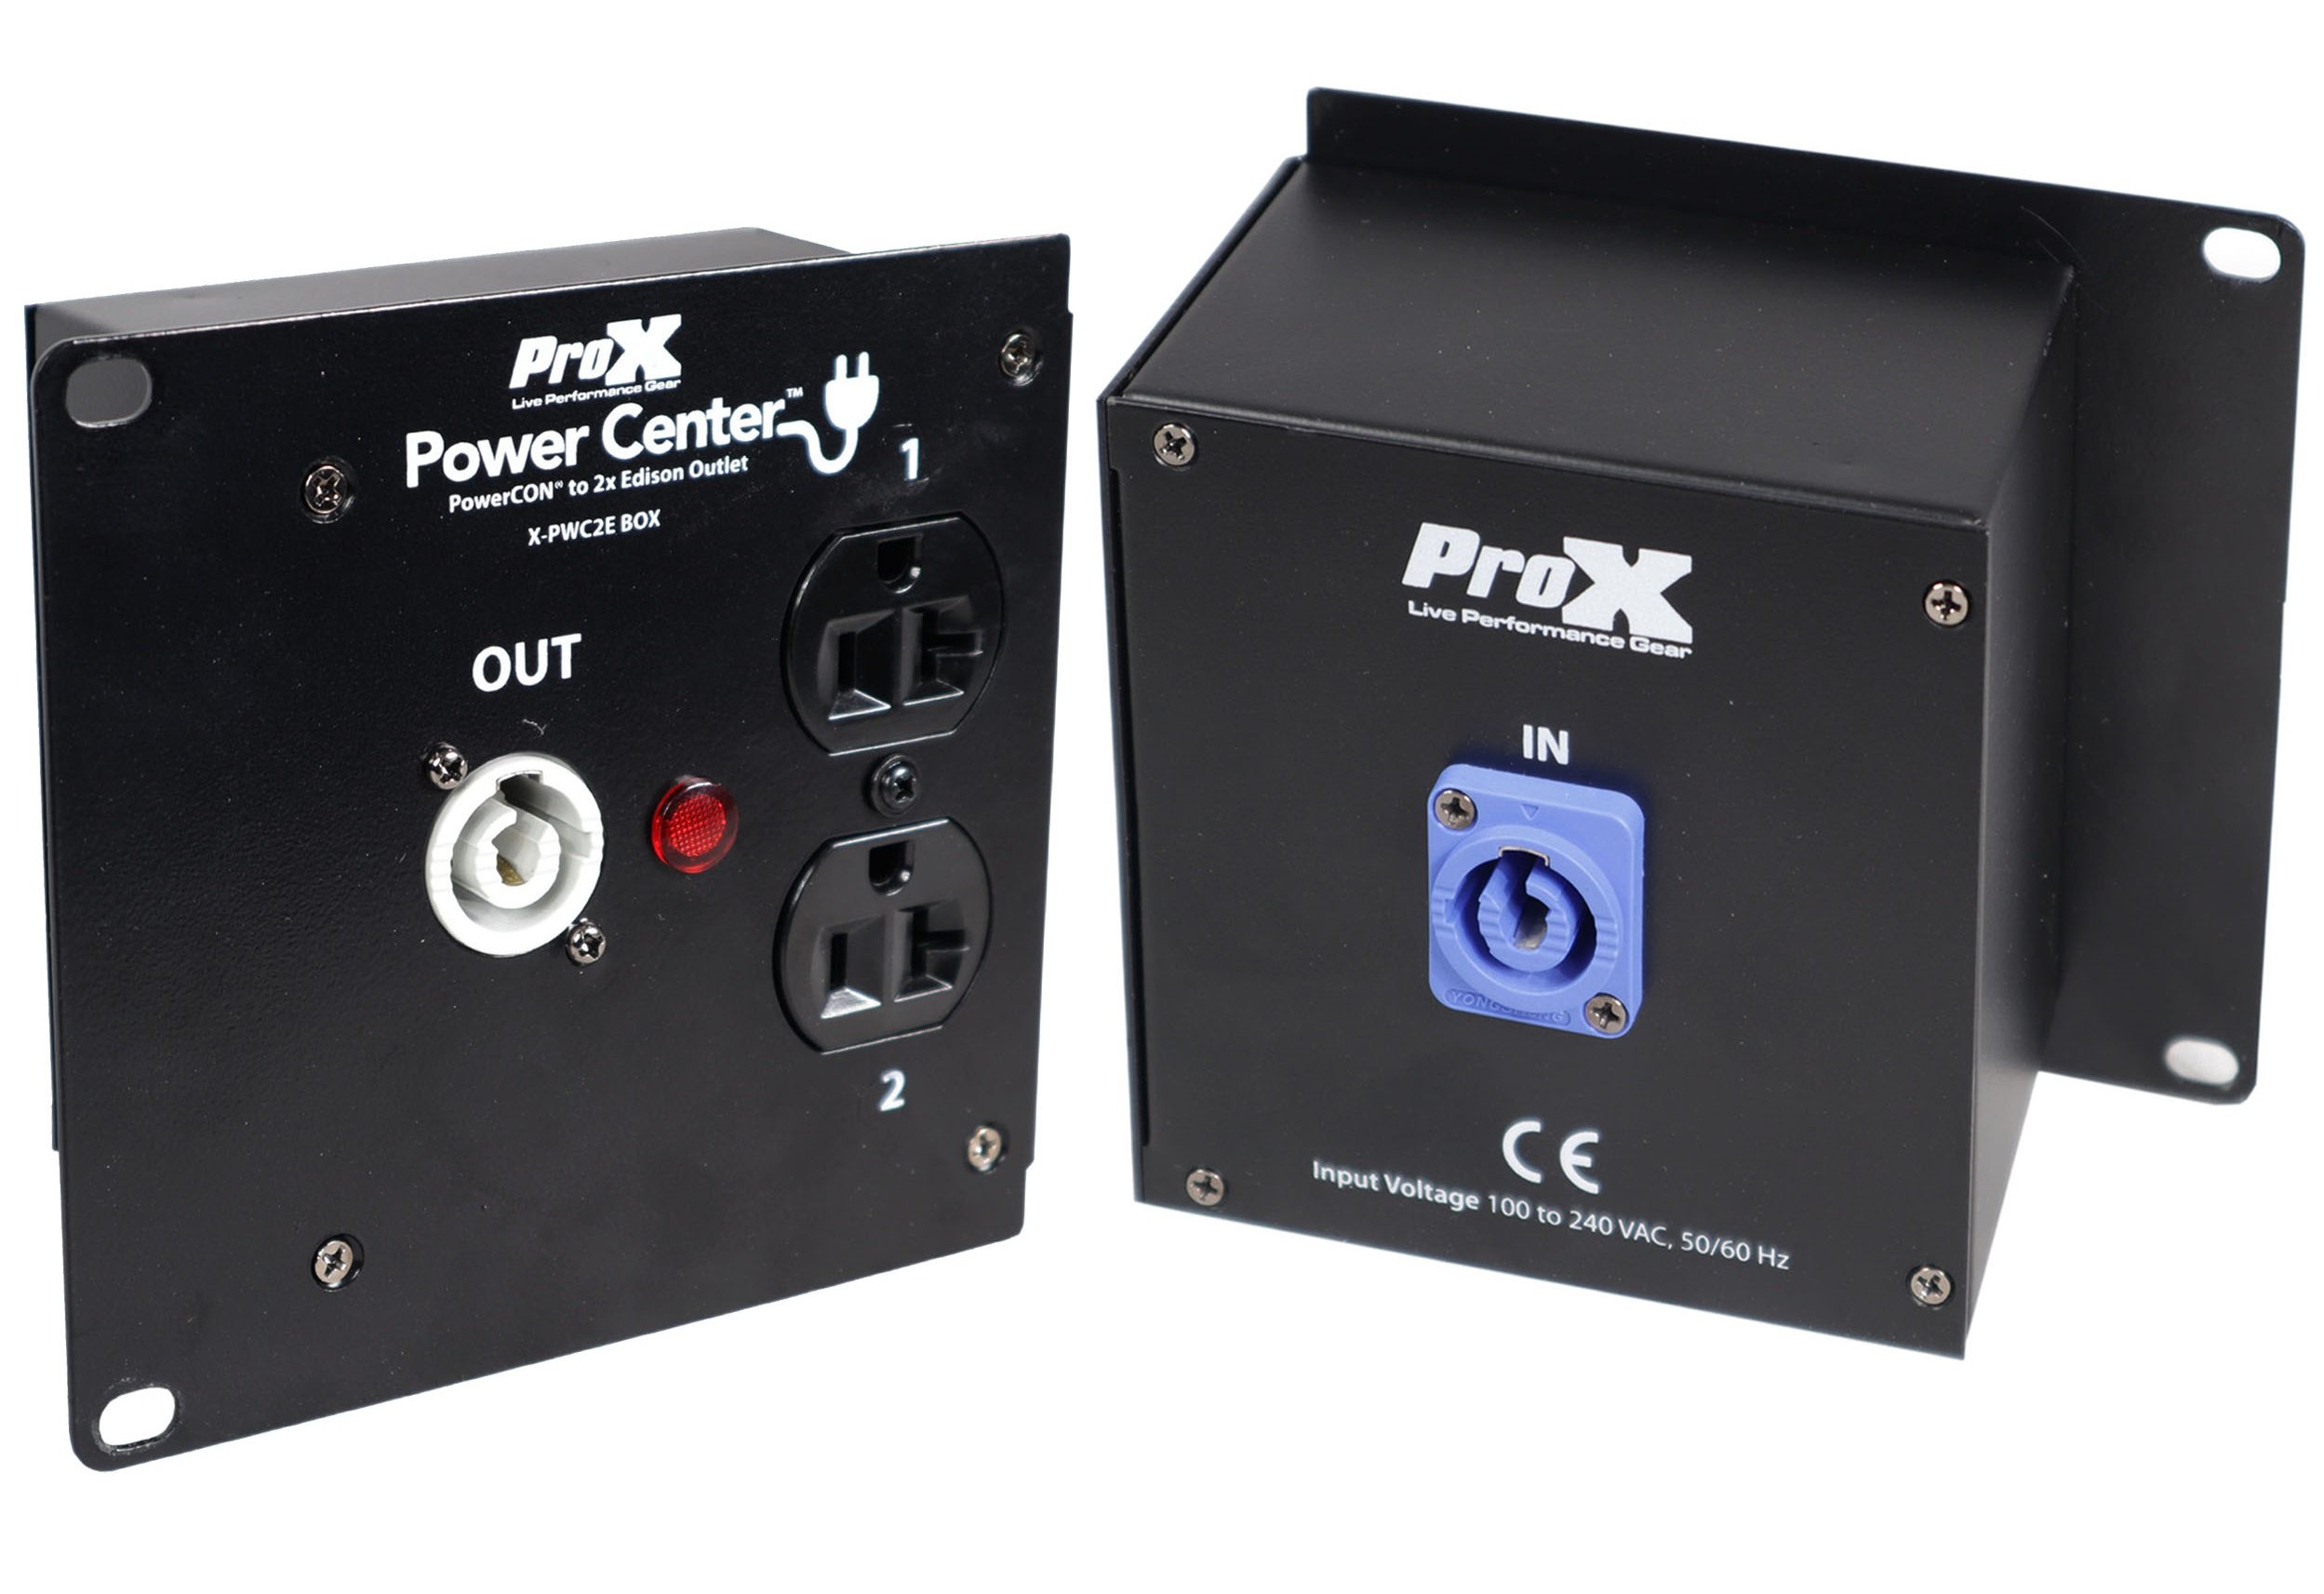 prox-x-pw-c2e----box-powercon-compatible-to-2x-edison-power-outlet-box-20a-in-out-rack-mountable.jpeg